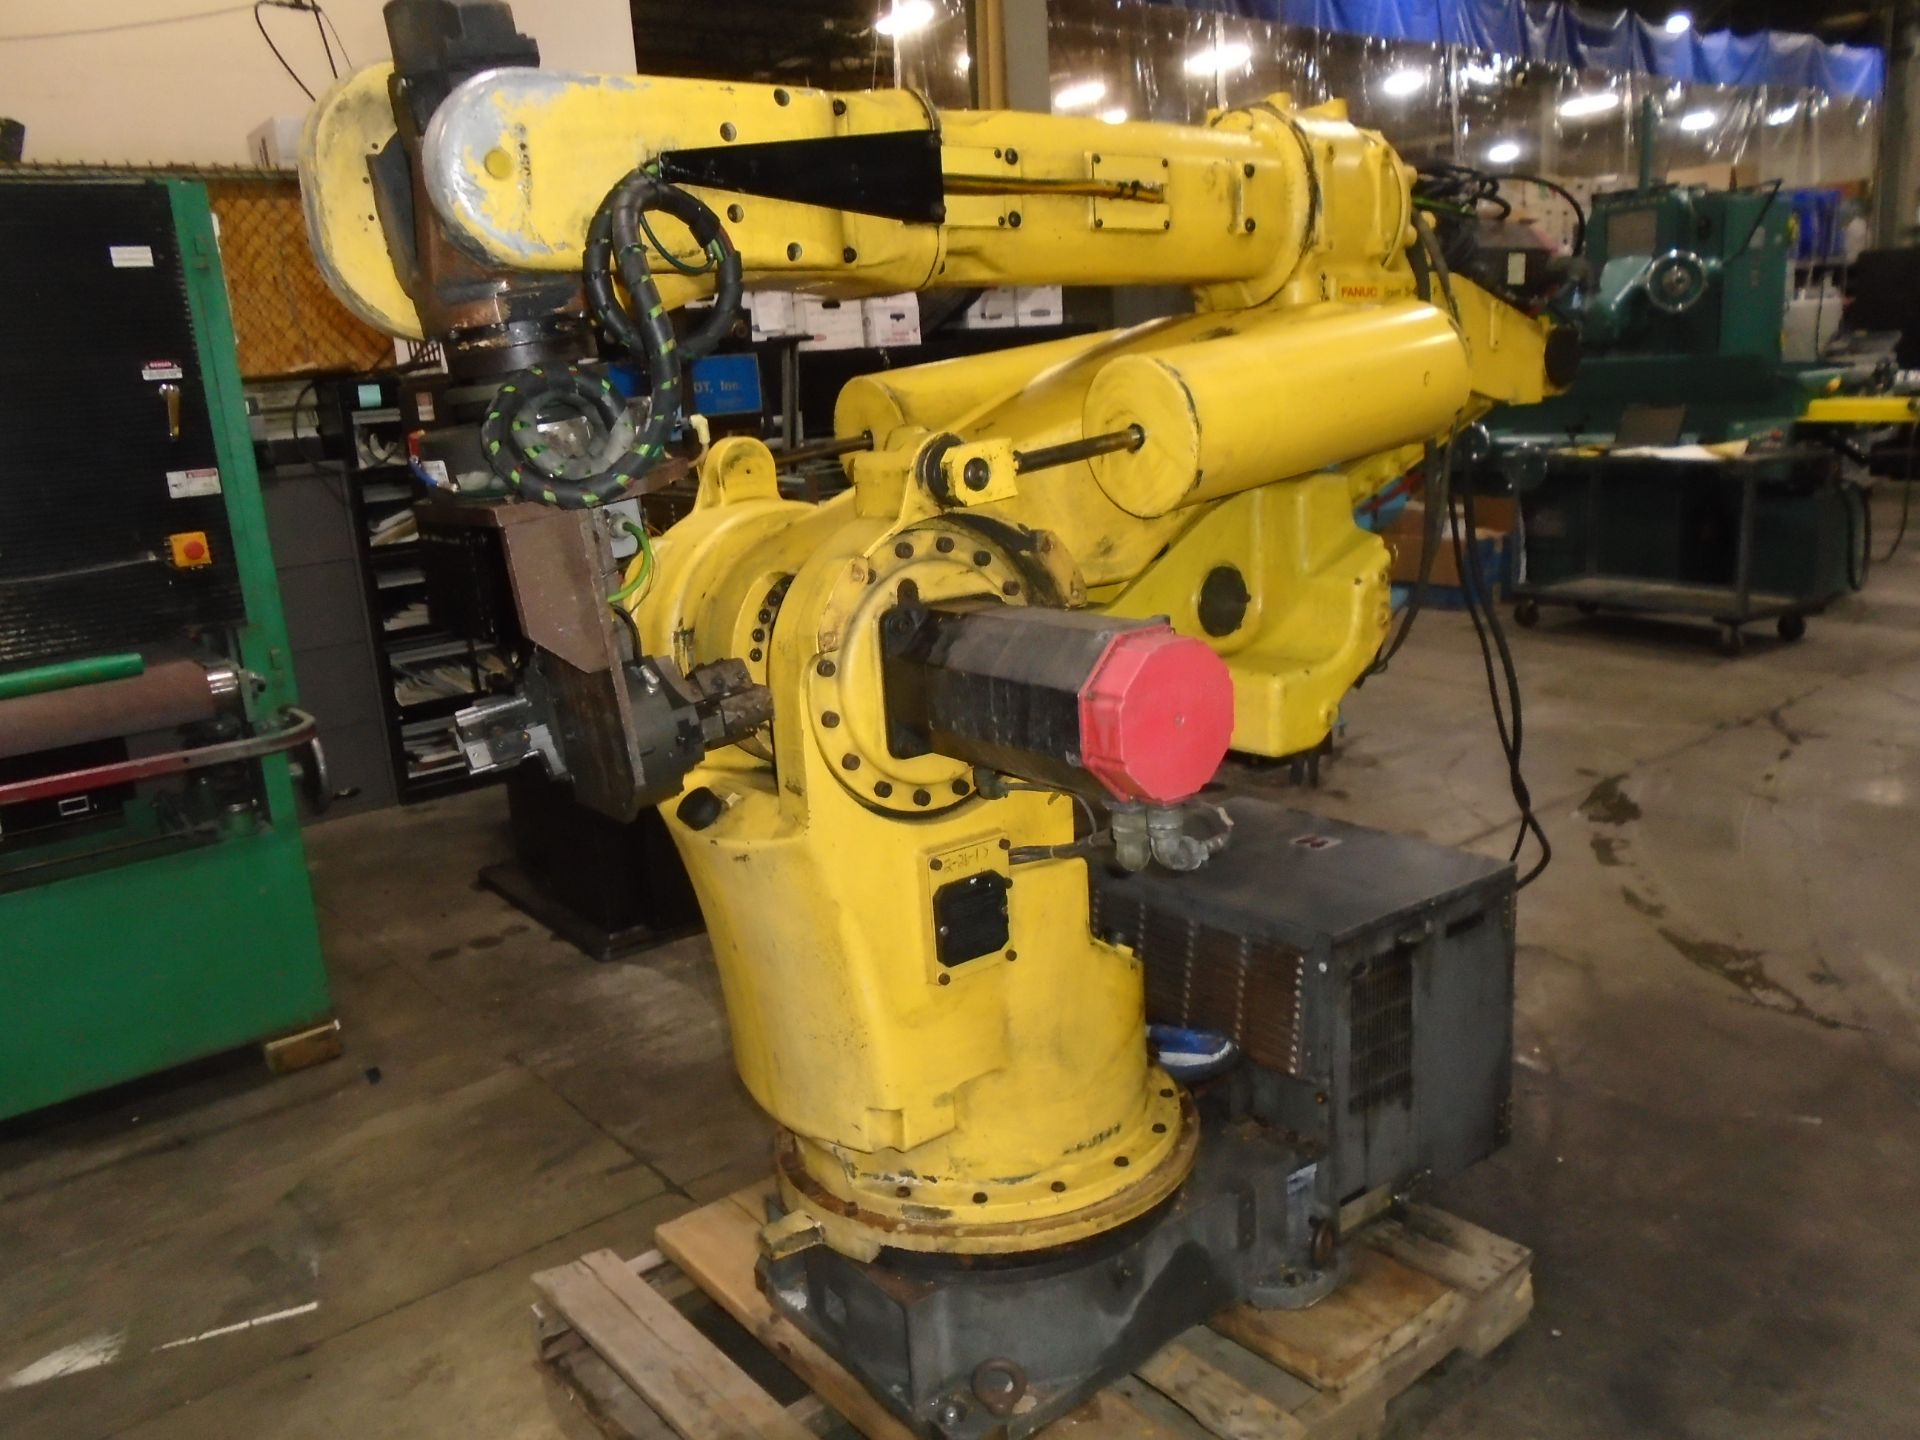 Fanuc S420iF 6 Axis Robot 140 KG Payload RJ2 Controller With Tech Pendent - Image 4 of 10